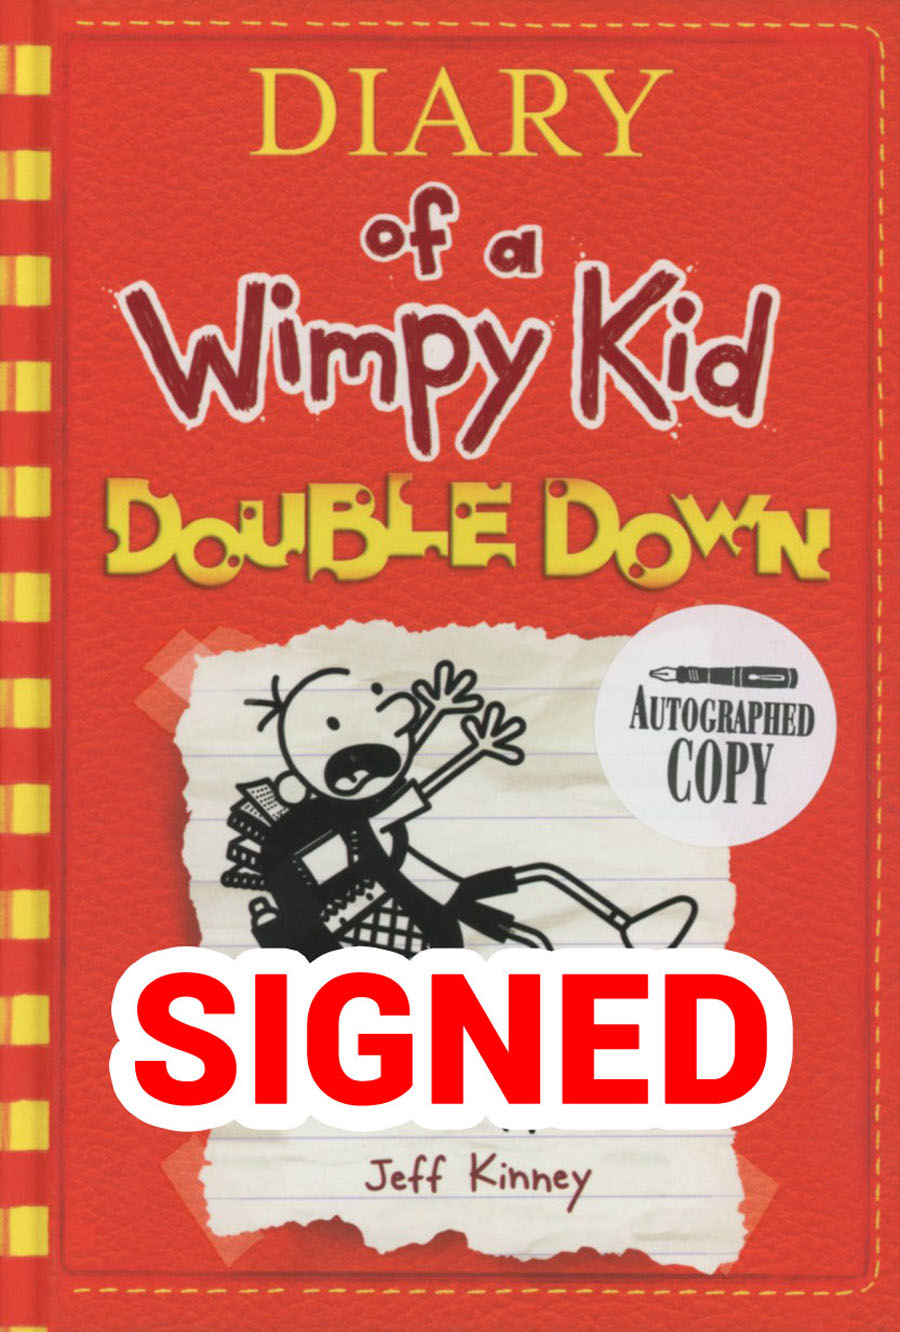 Diary Of A Wimpy Kid Vol 11 Double Down HC Signed Edition